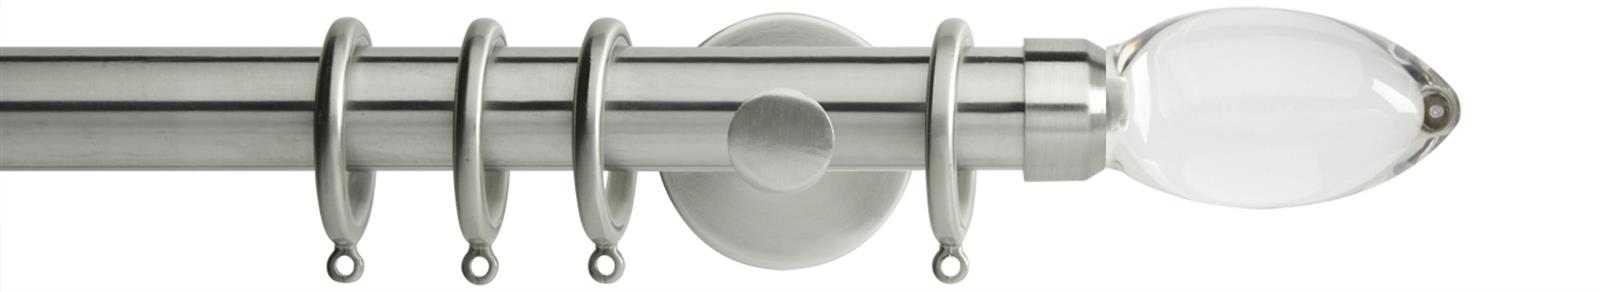 Neo Premium 28mm Pole Stainless Steel Cylinder Clear Teardrop